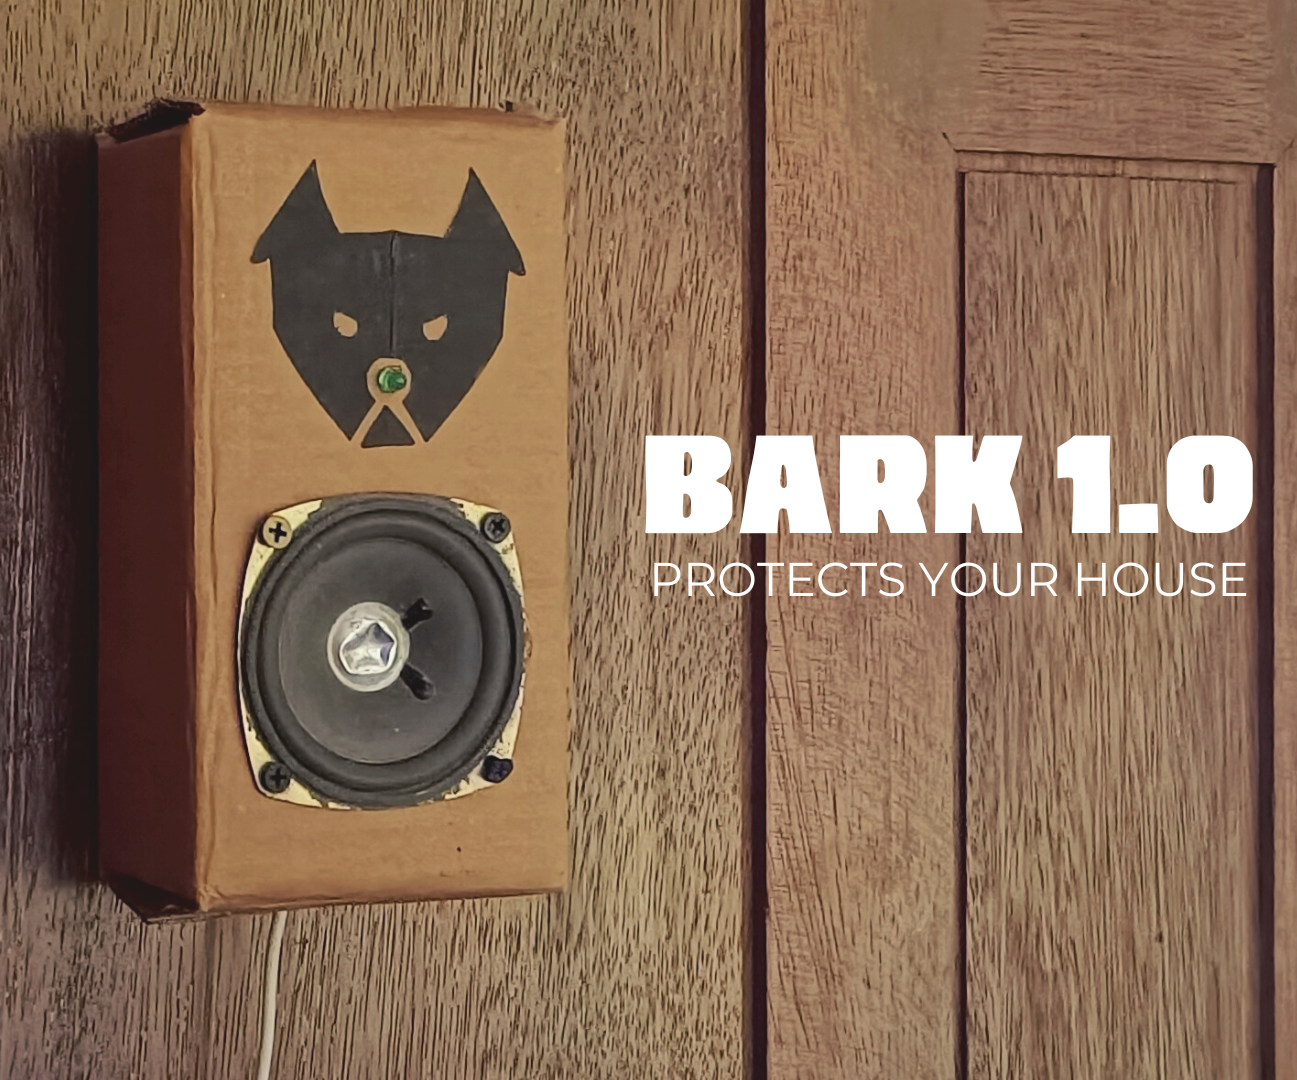 Bark 1.0 - Makes Dog Barking Sounds When There Is Motion in Front of the Door